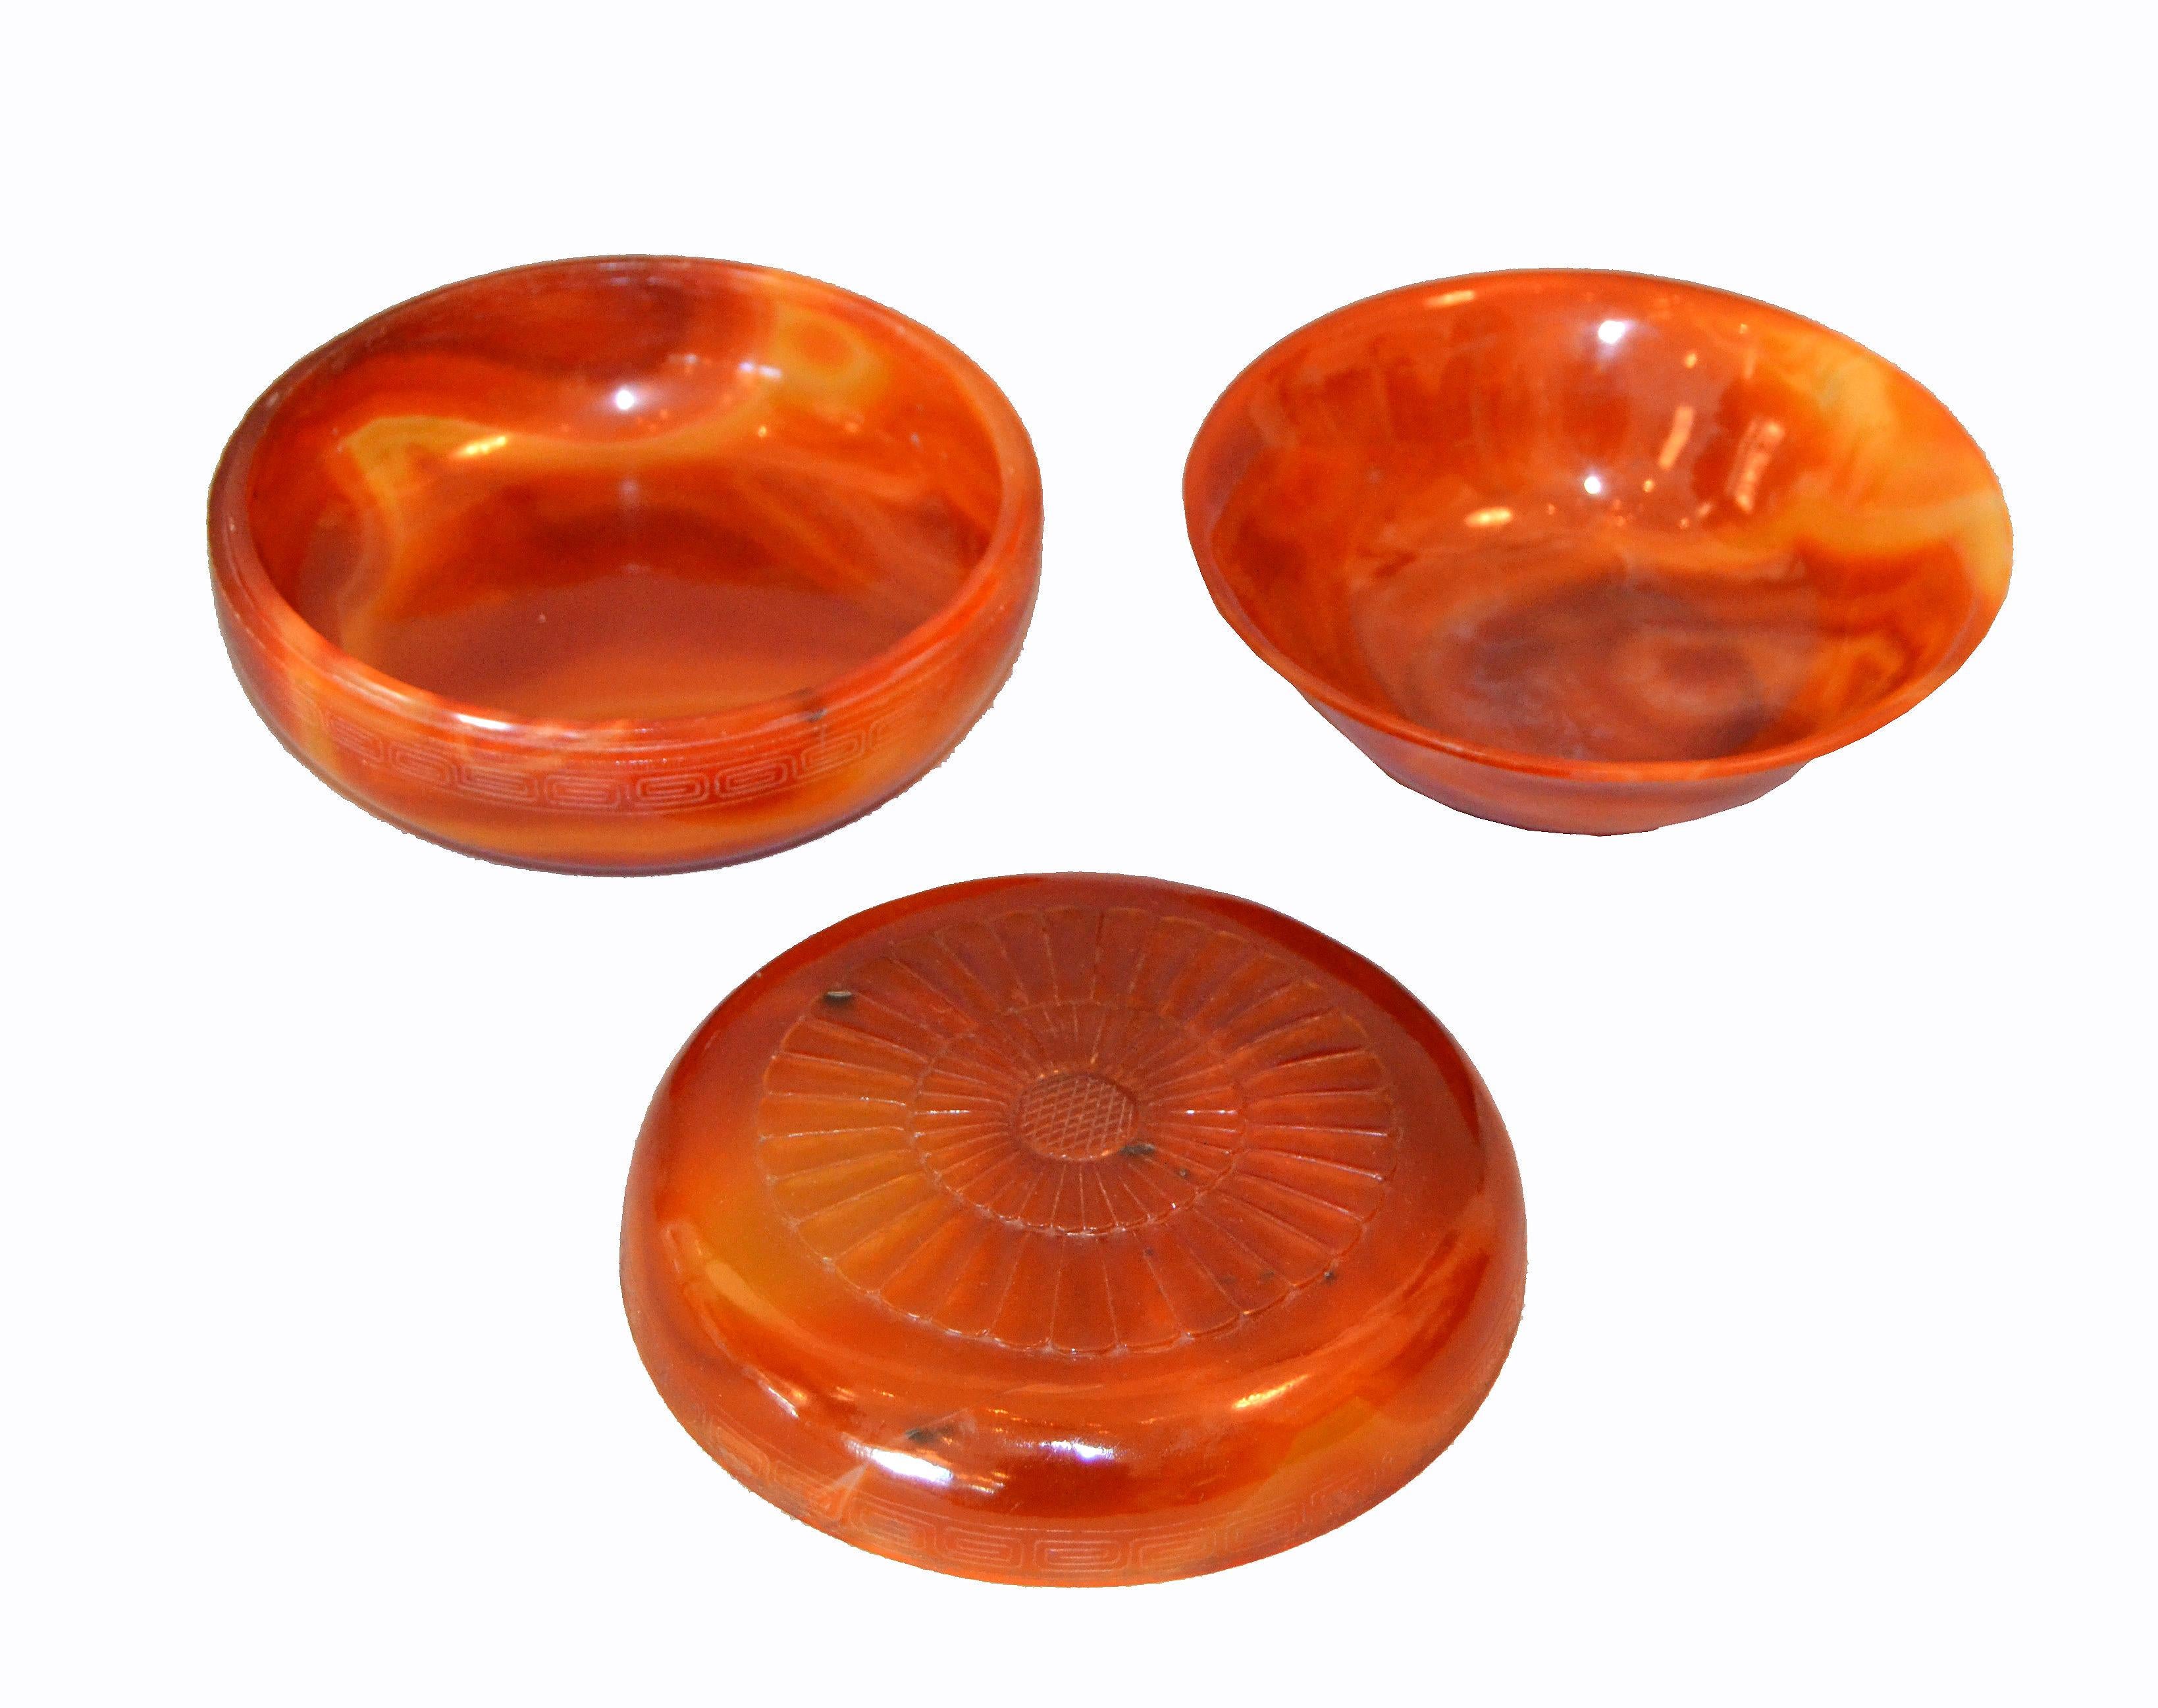 Decorative vintage set of carved stone agate box and bowl in amber color.
Please not the stunning pattern of the stone and the carvings around the lidded bowl.
Superb craftsmanship for your table decoration.